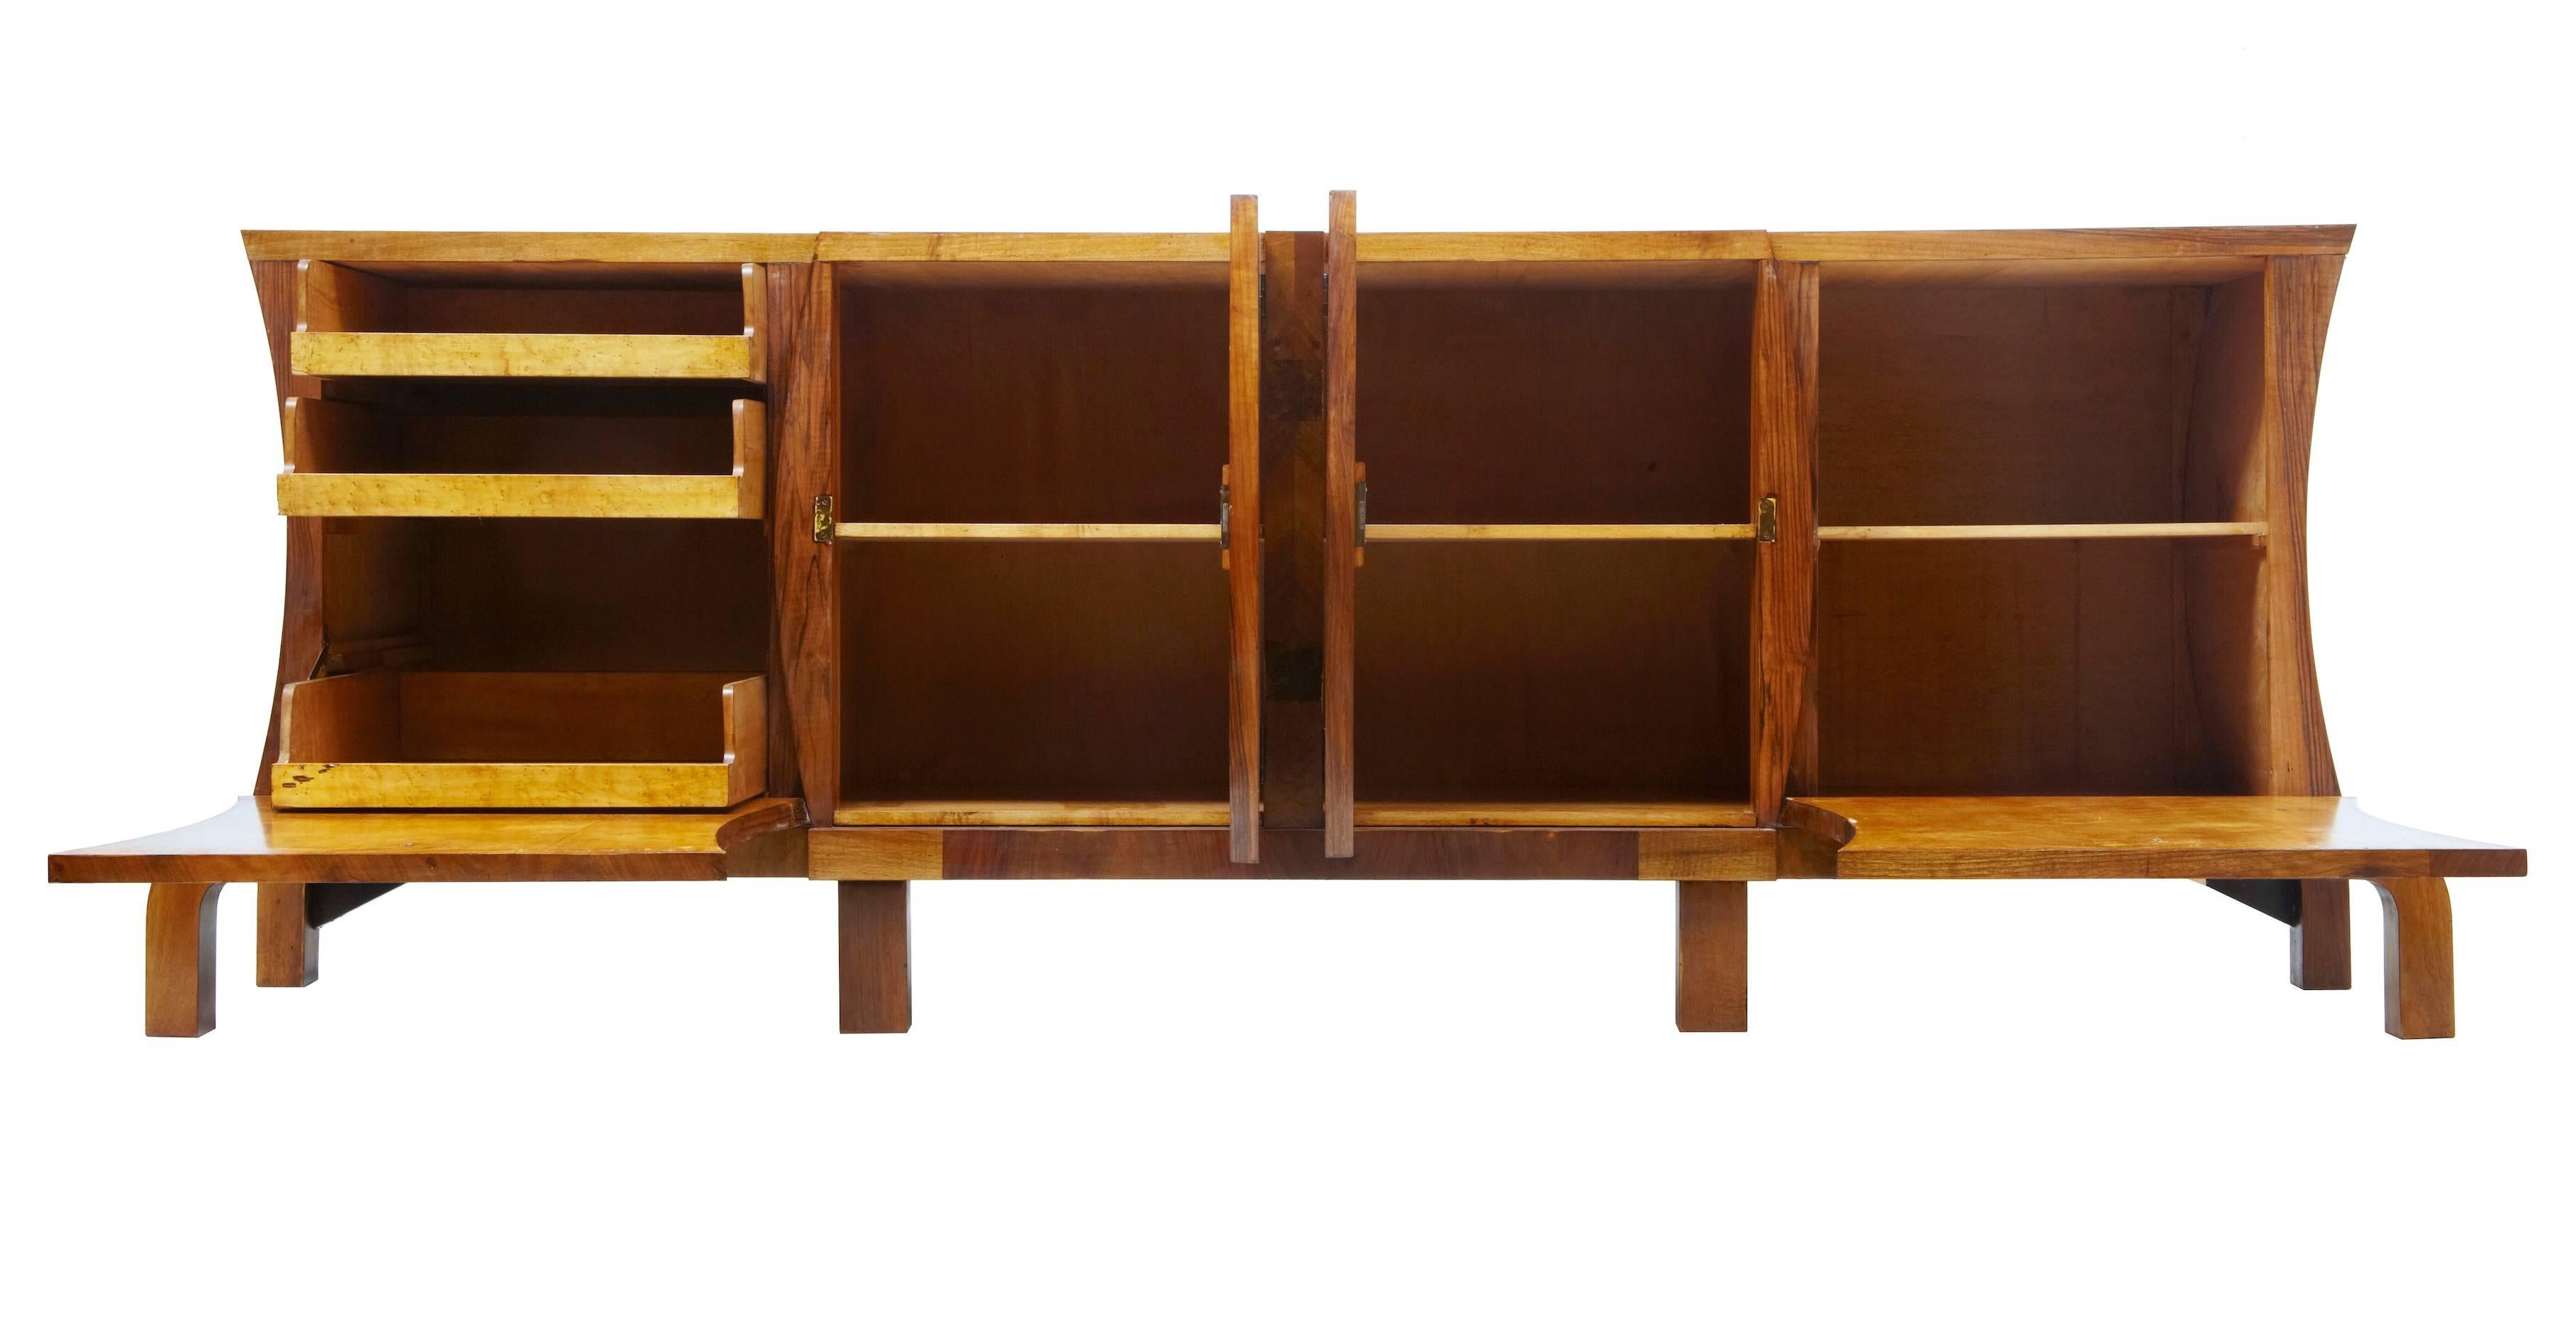 Imposing Art Deco sideboard of large proportions, circa 1920.
Beautiful veneered in walnut and beautifully crossbanded in burr walnut.
Two central doors that open to a single shelf in each, flanked either side by a drop down door front. Containing